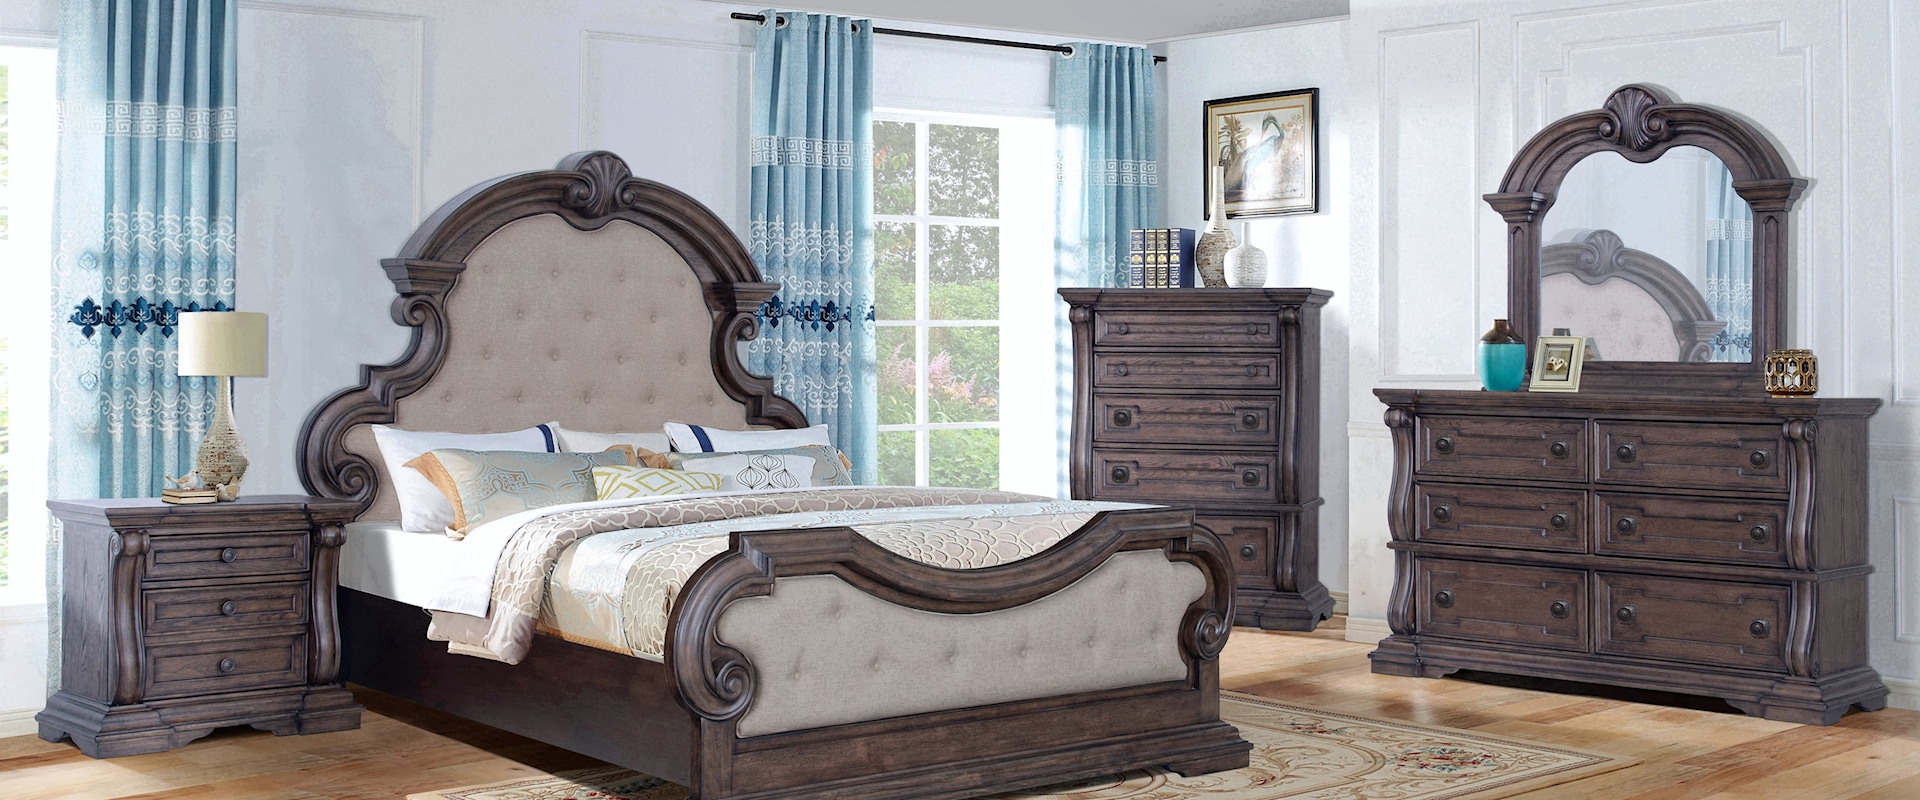 Queen 7-PC Group including Dresser, Crown Mirror and Complete Queen Bed Headboard, Footboard and Rails with BONUS 2 Nightstands